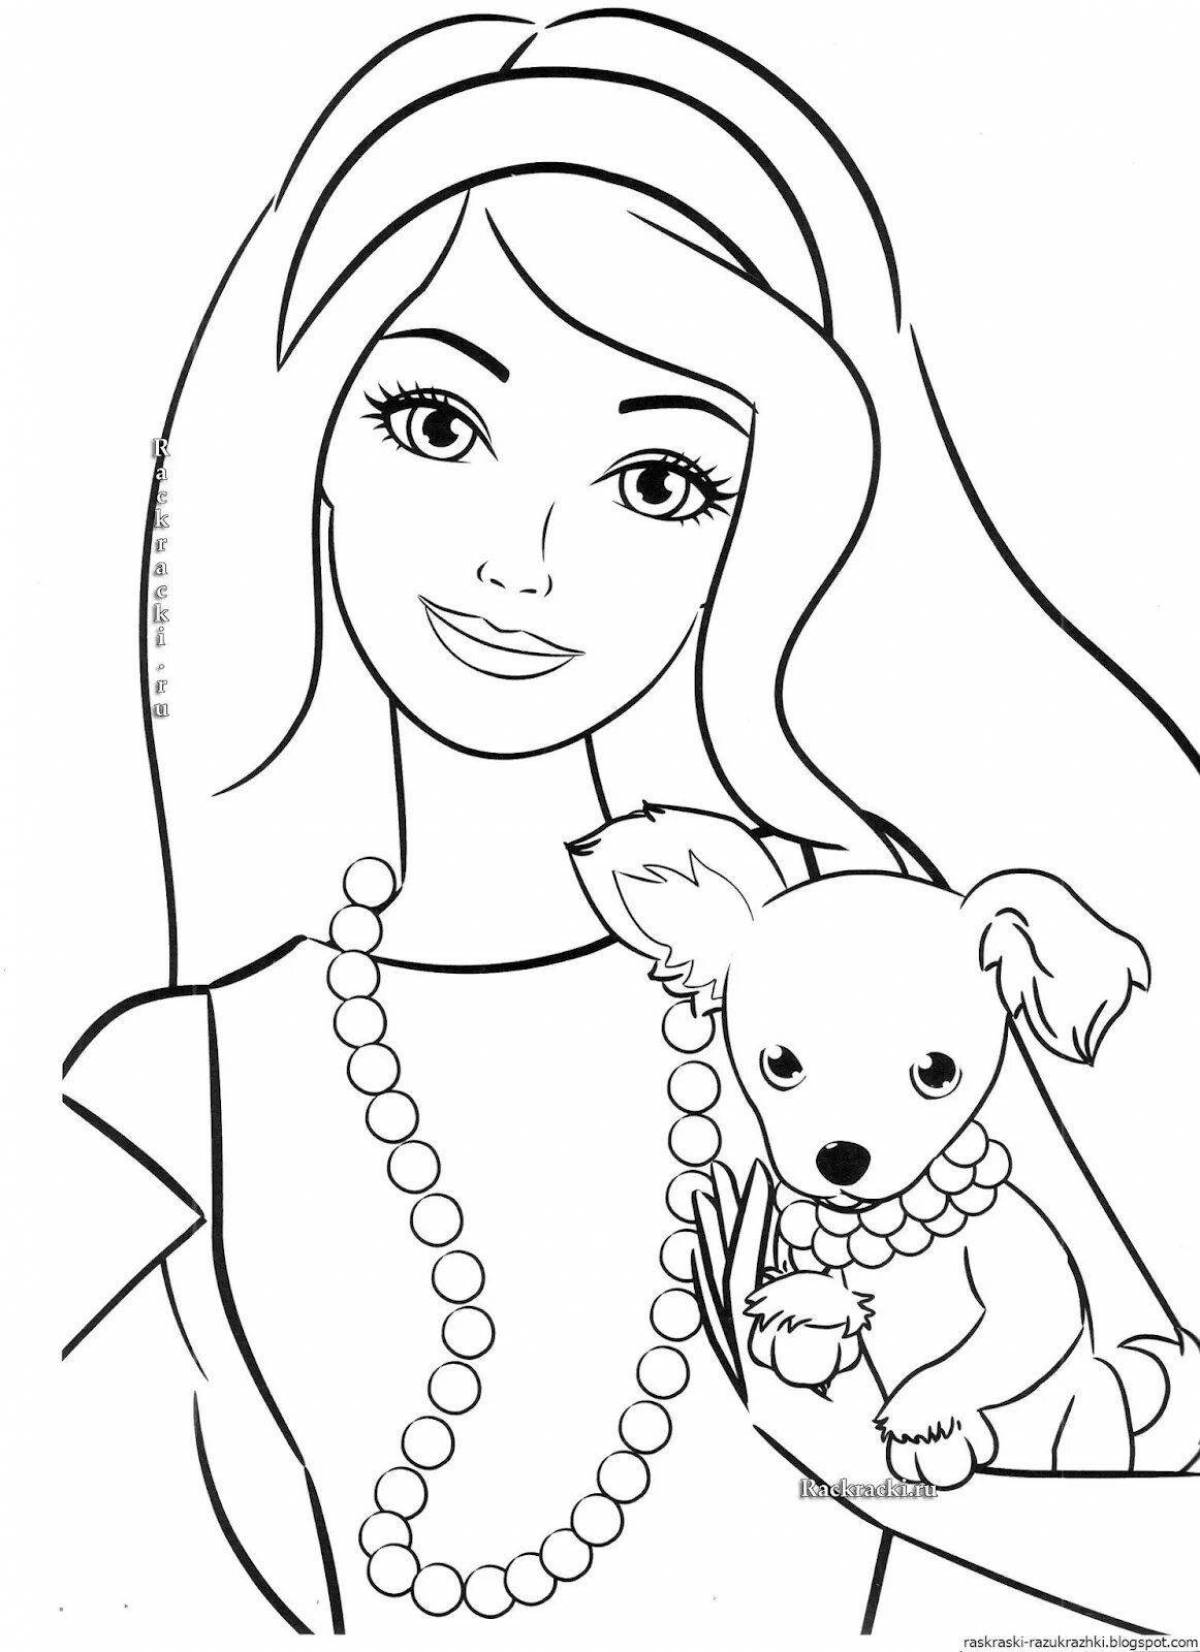 Gorgeous coloring book for girls - the best in the world